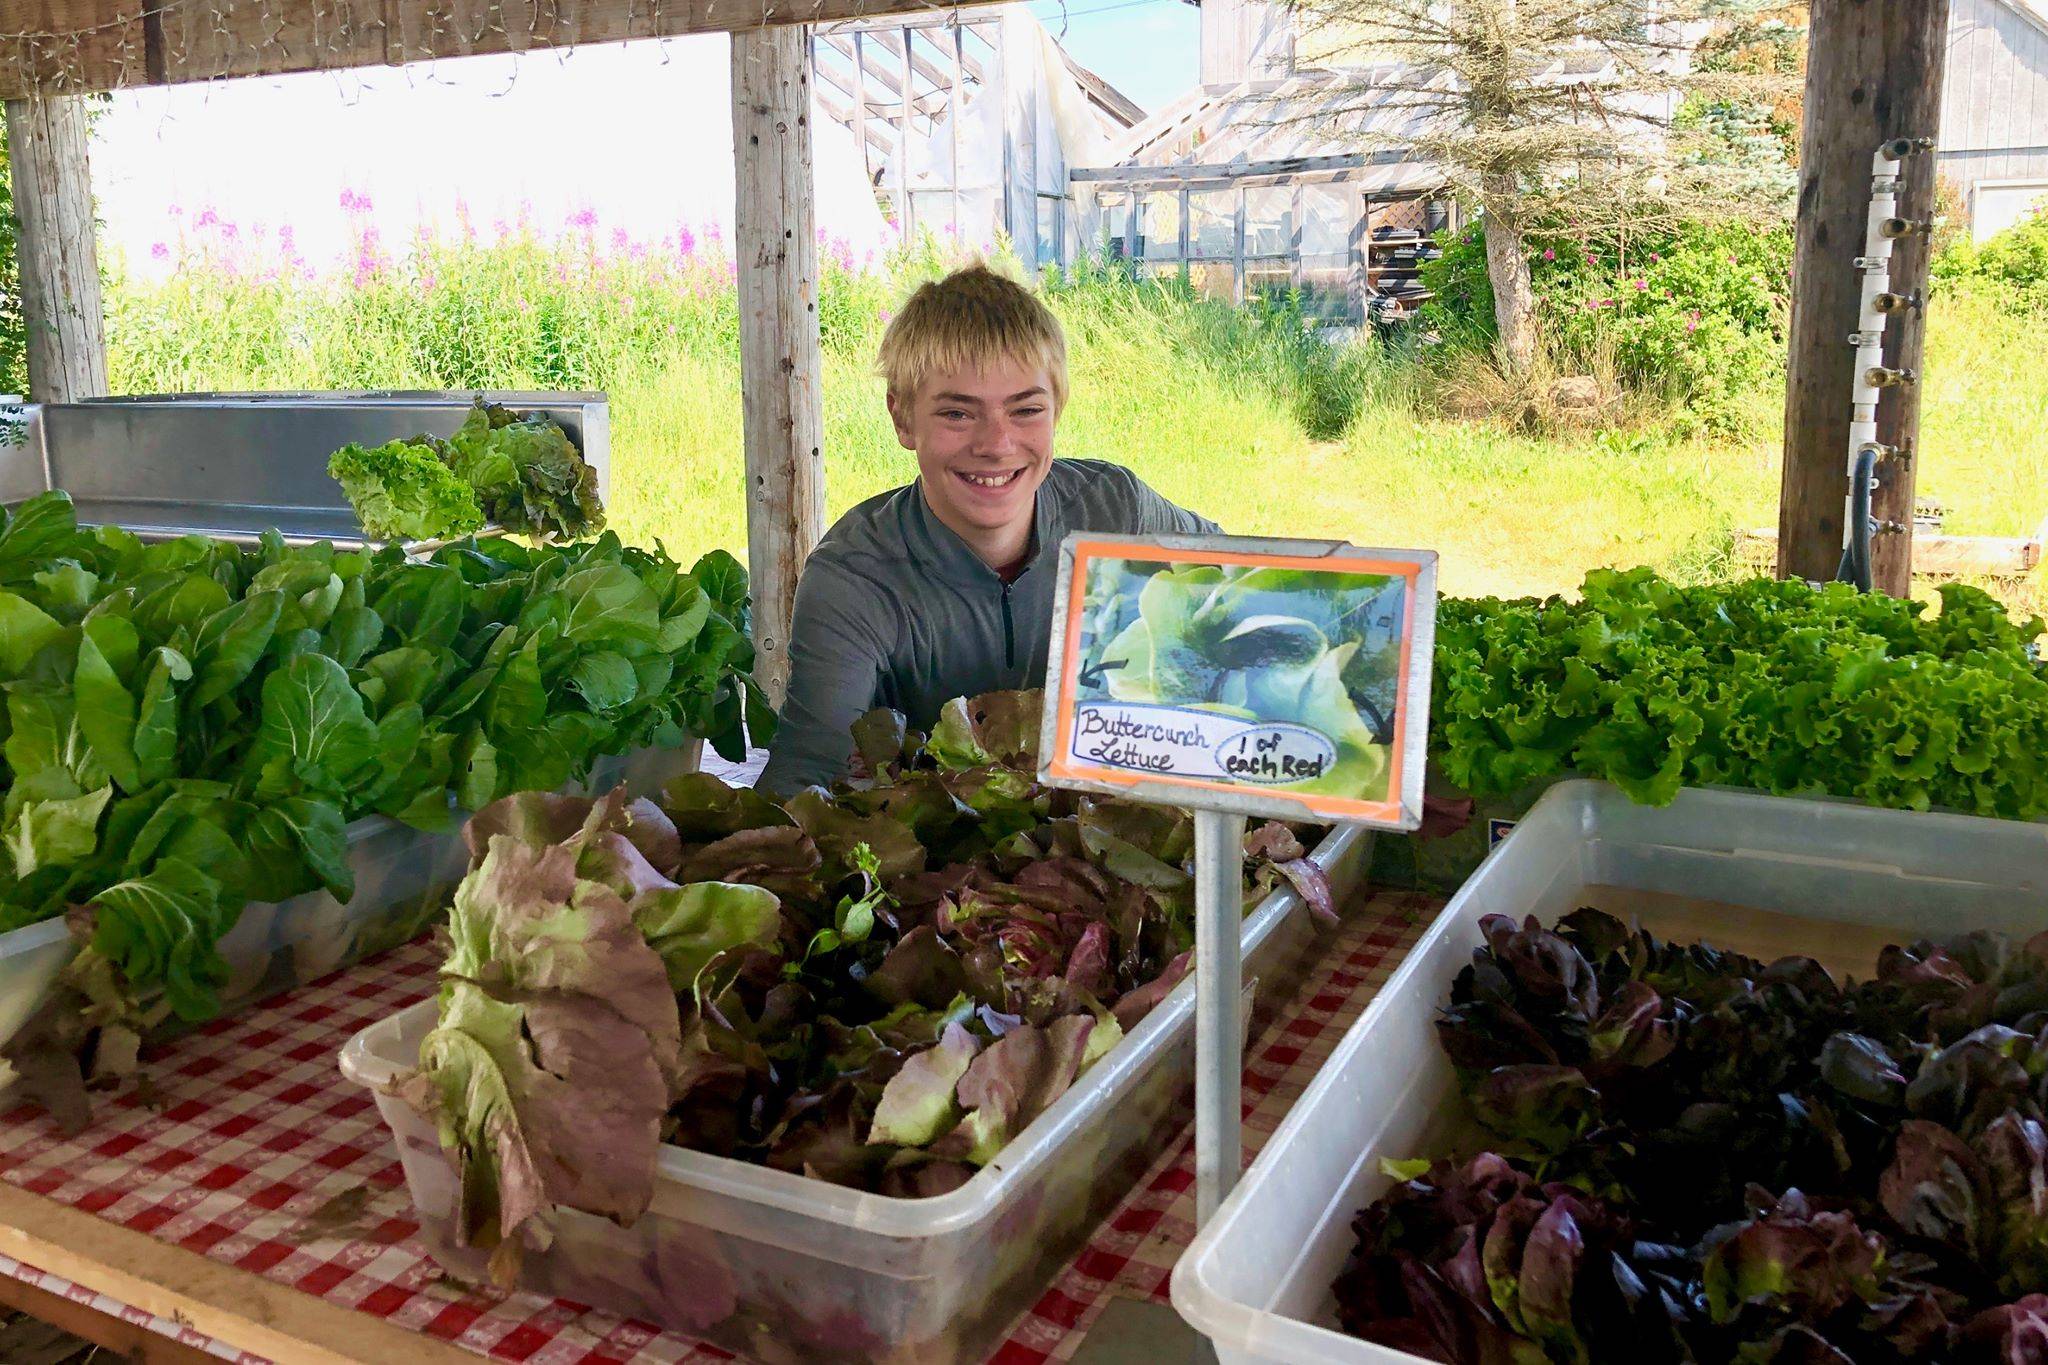 Kale Morse places produce at the pick up center for Ridgeway Farm’s community supported agriculture programs, which helps distribute locally grown produce to local residents, Wednesday, July 17, 2019, near Soldotna, Alaska. (Photo by Victoria Petersen/Peninsula Clarion)